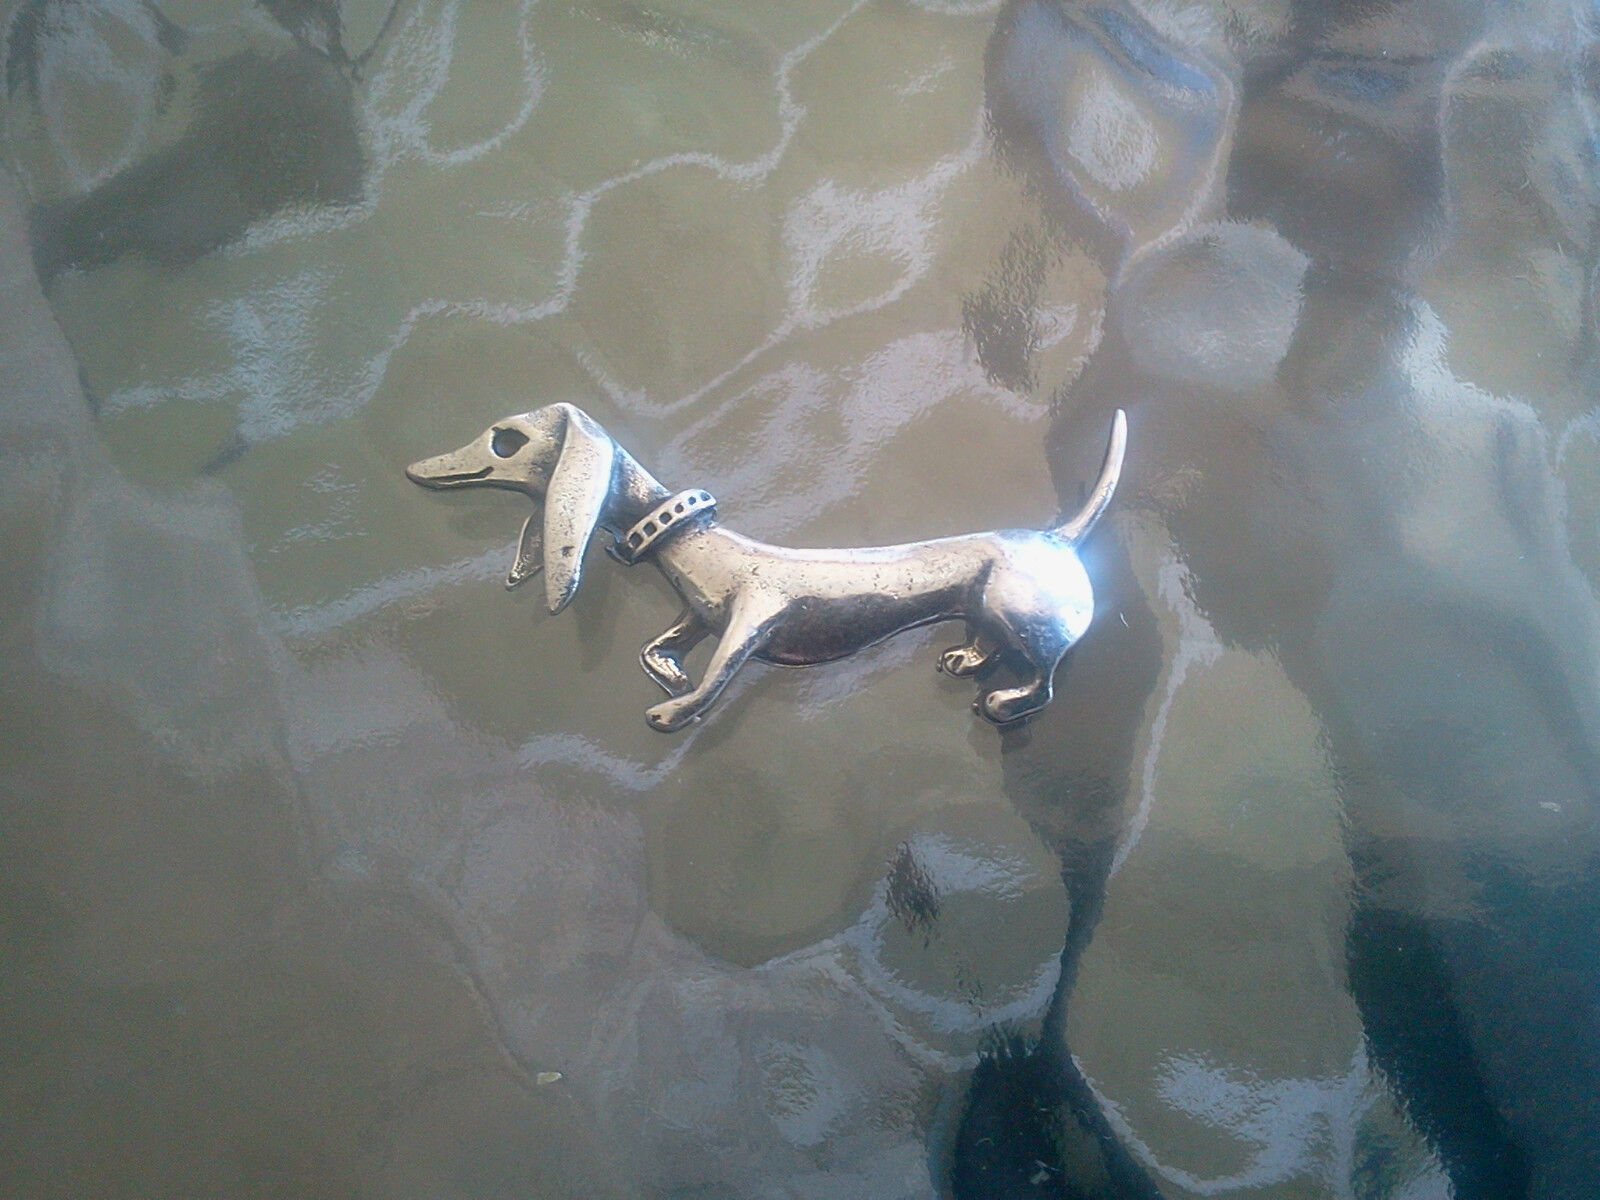 HOUSE PET PUREBRED ANIMAL JEWELRY 1 DACHSHUND PEWTER PIN ALL NEW.